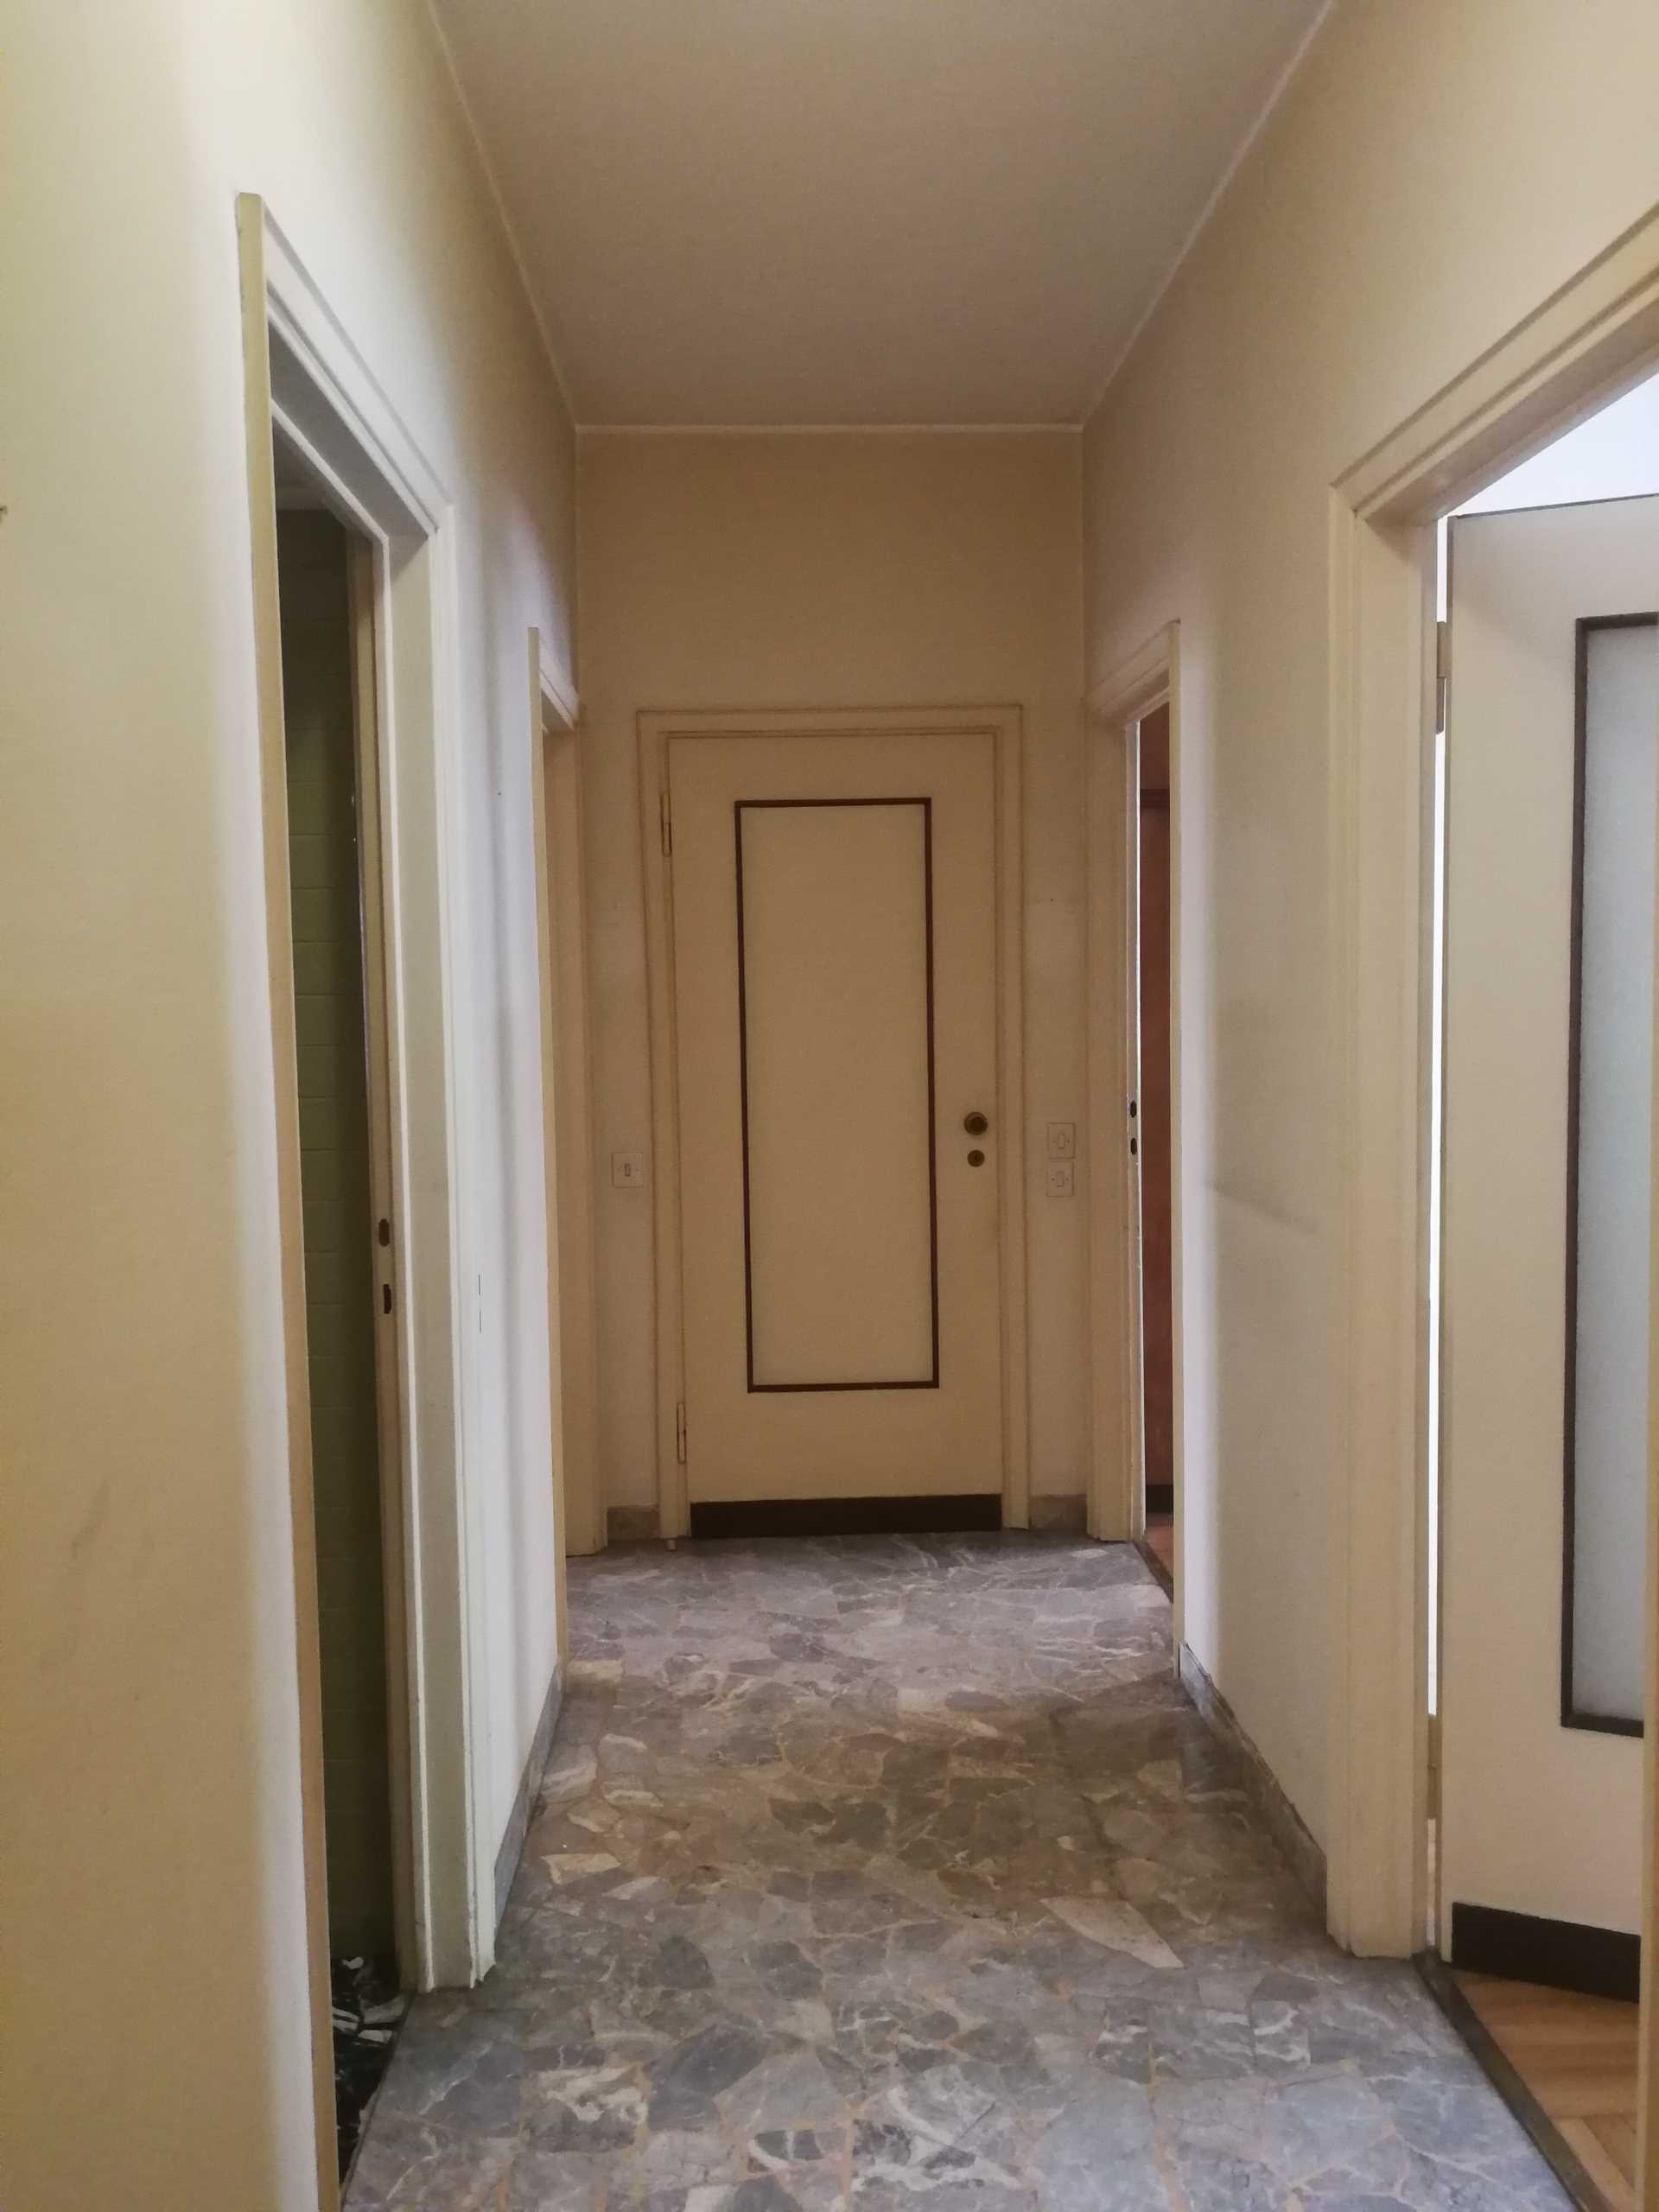 Before photos of a renovated apartment.